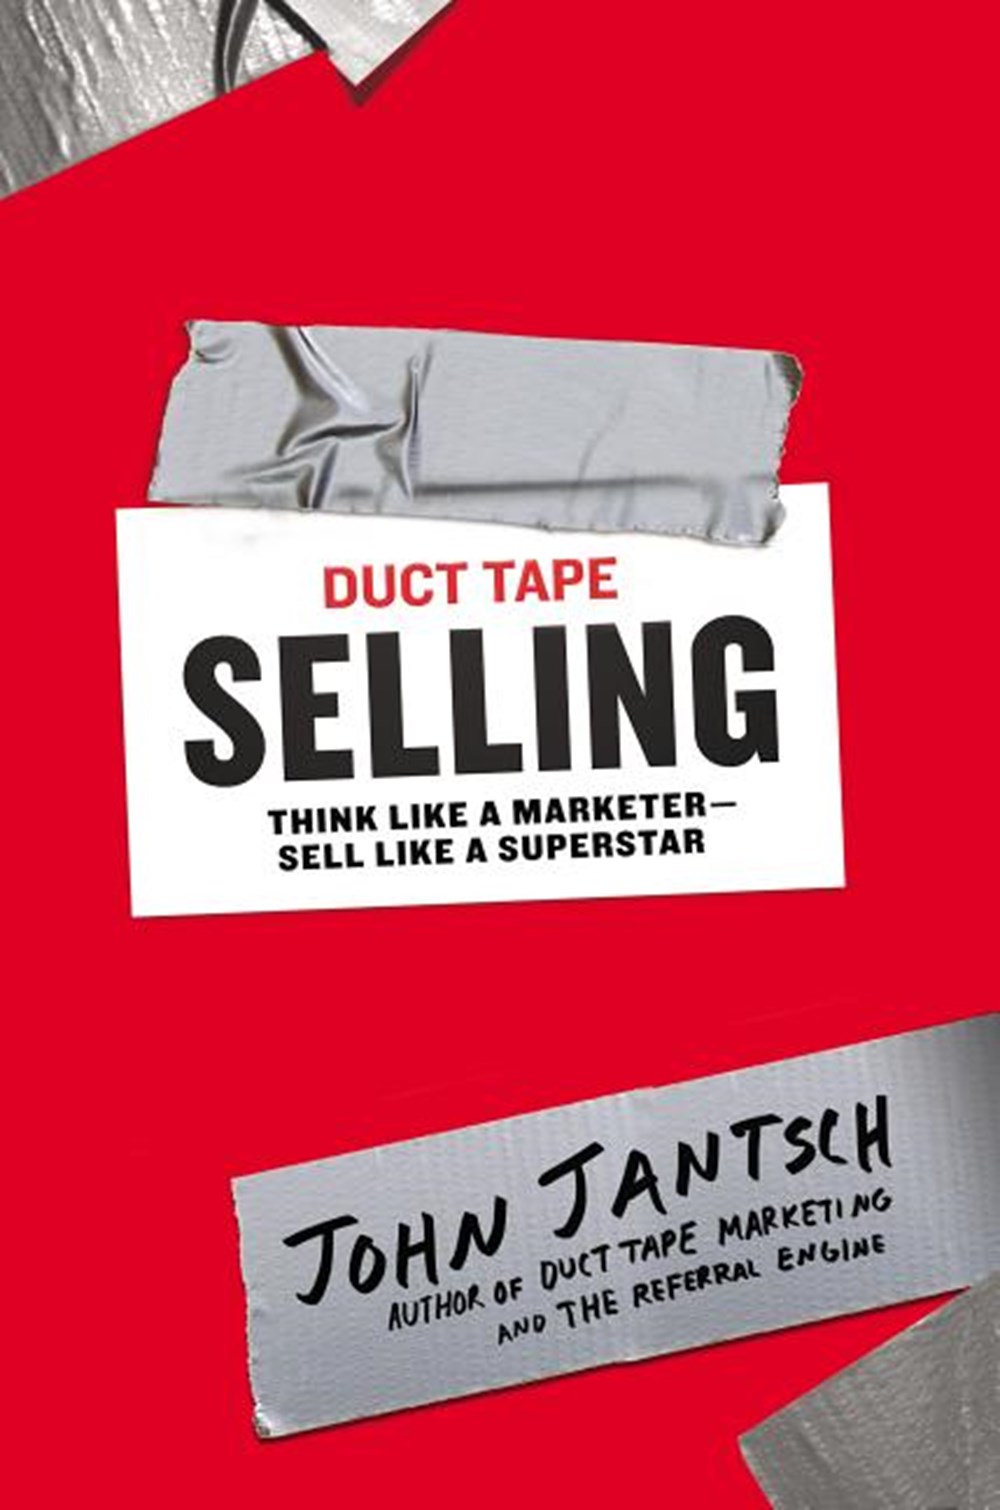 Duct Tape Selling Think Like a Marketer-Sell Like a Superstar